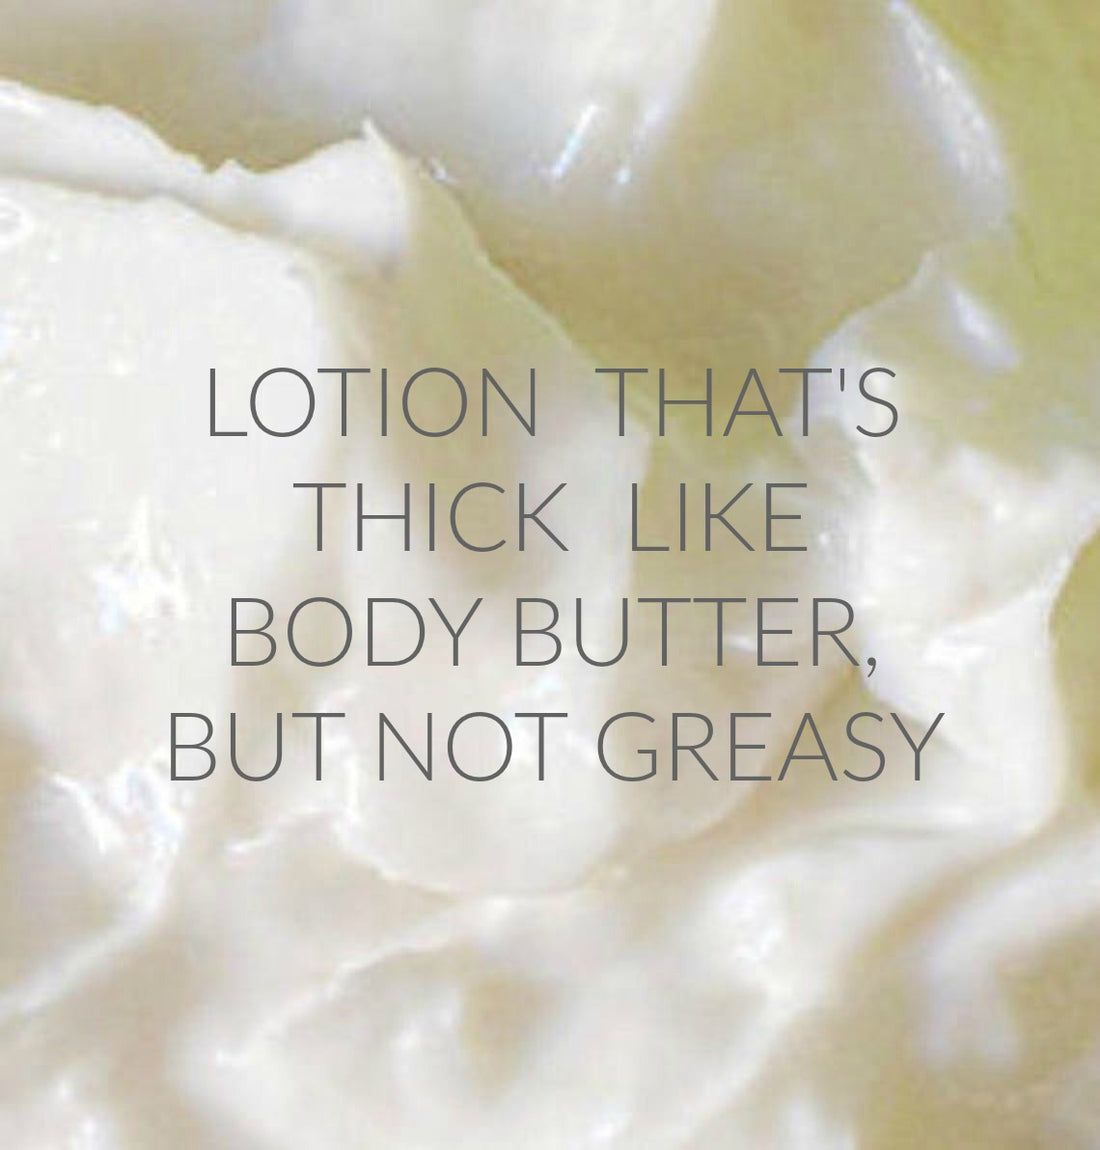 EGYPTIAN COTTON scented Body Butter - BOGO - Buy  One 16 oz family size, get 1 any size 50% off deal